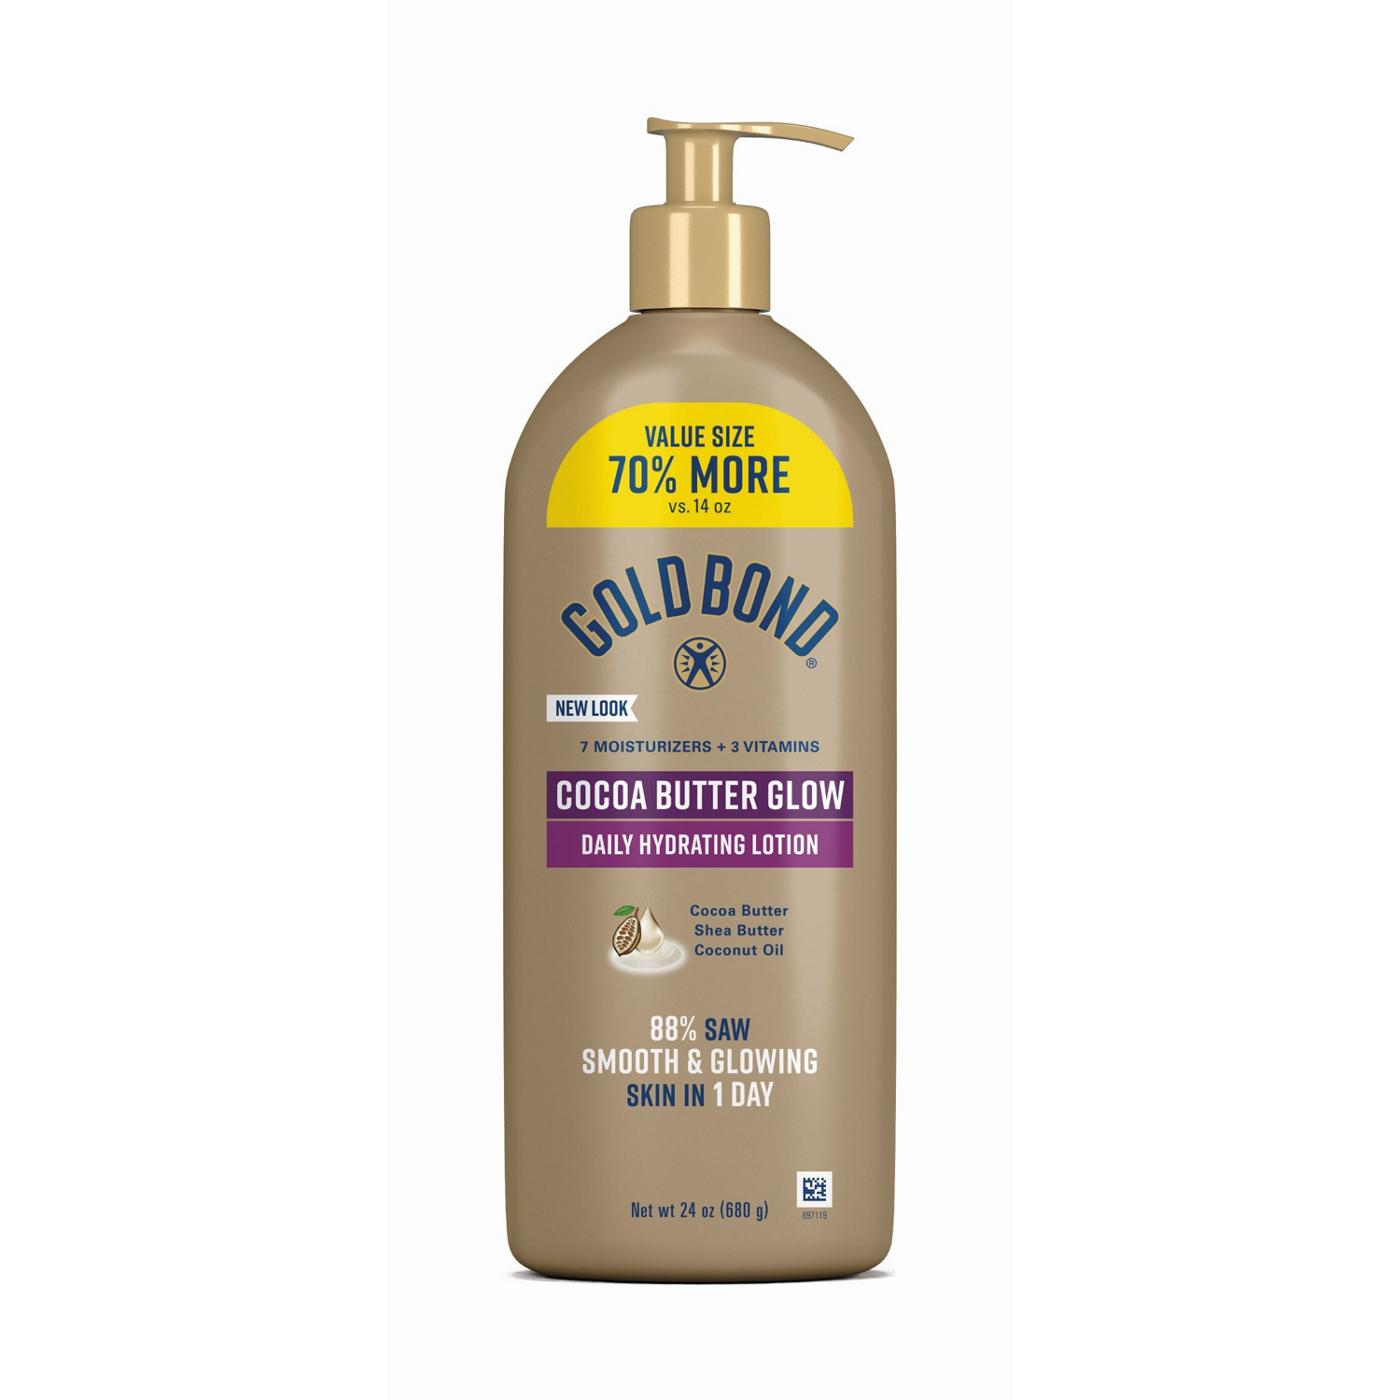 Gold Bond Cocoa Butter Glow Daily Hydrating Lotion; image 1 of 7